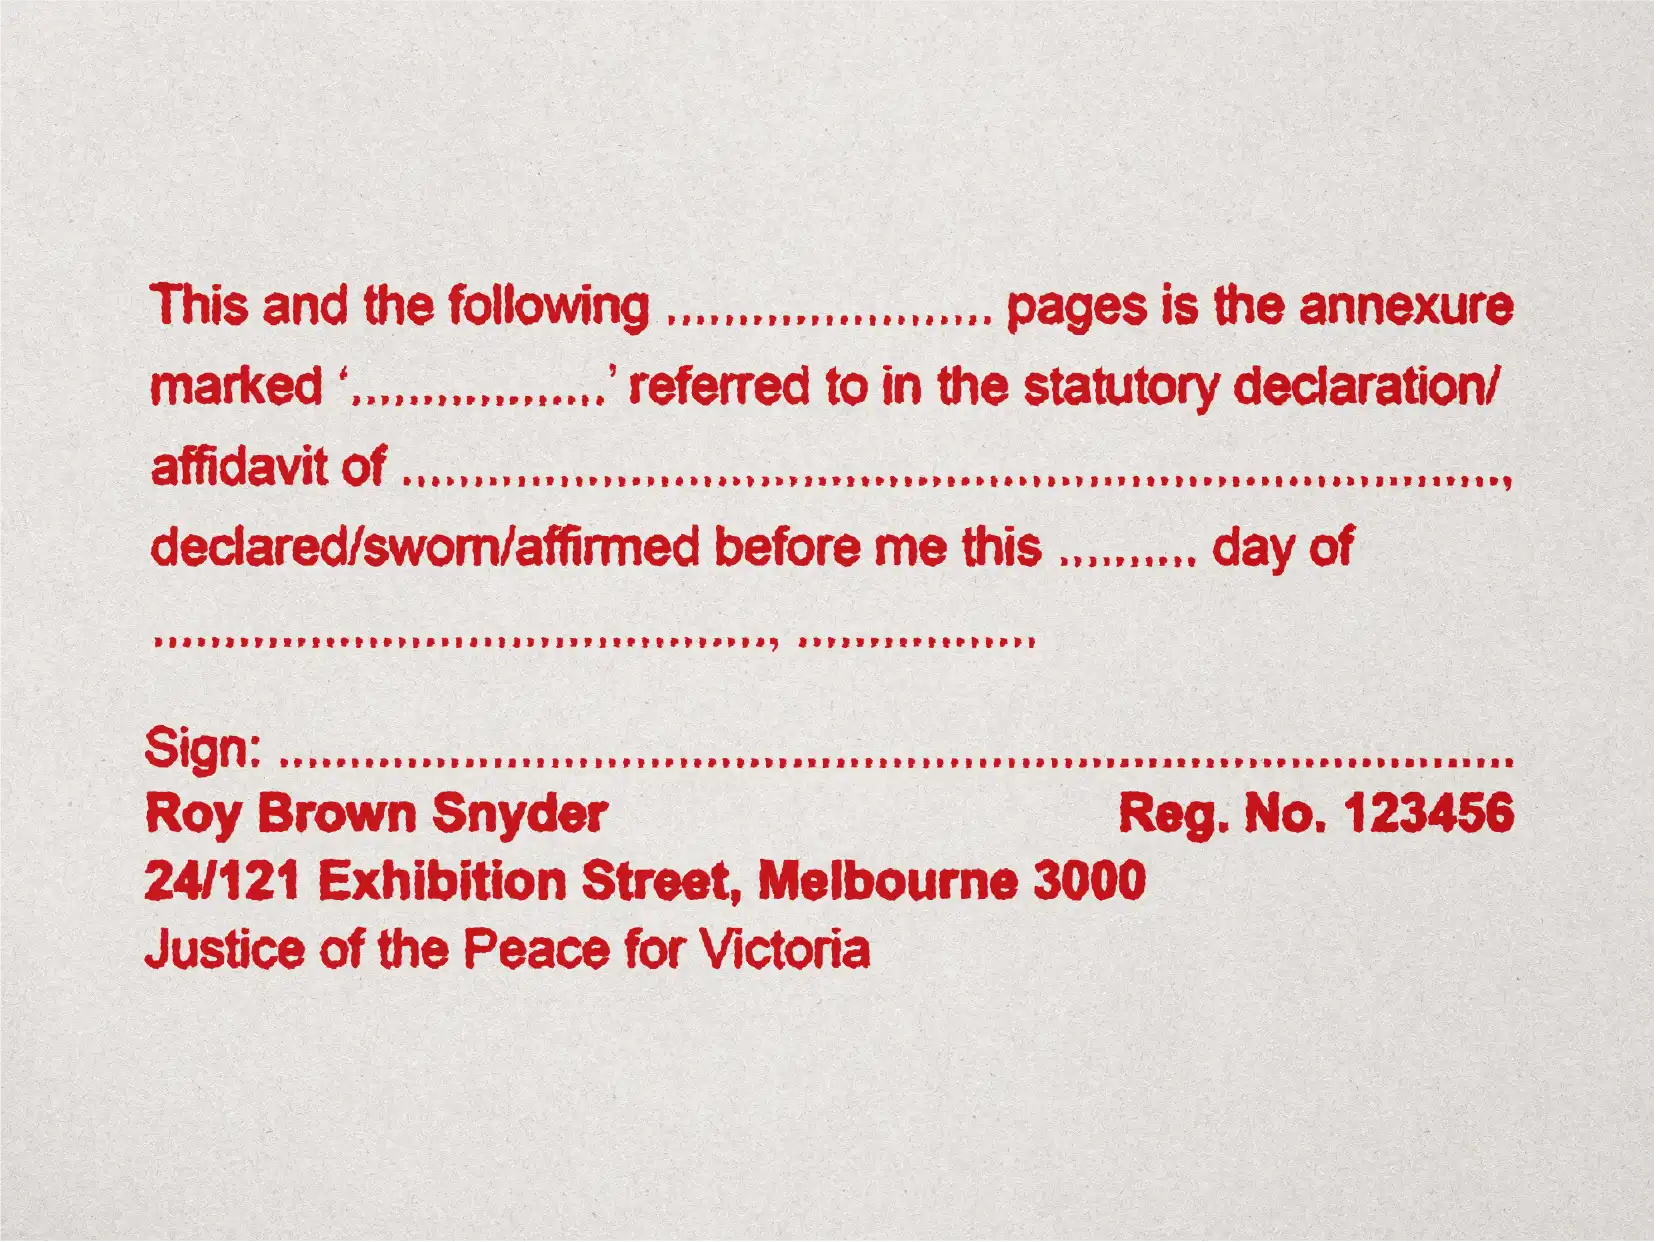 Red mock impression Lawyer custom Annexure stamp Victoria